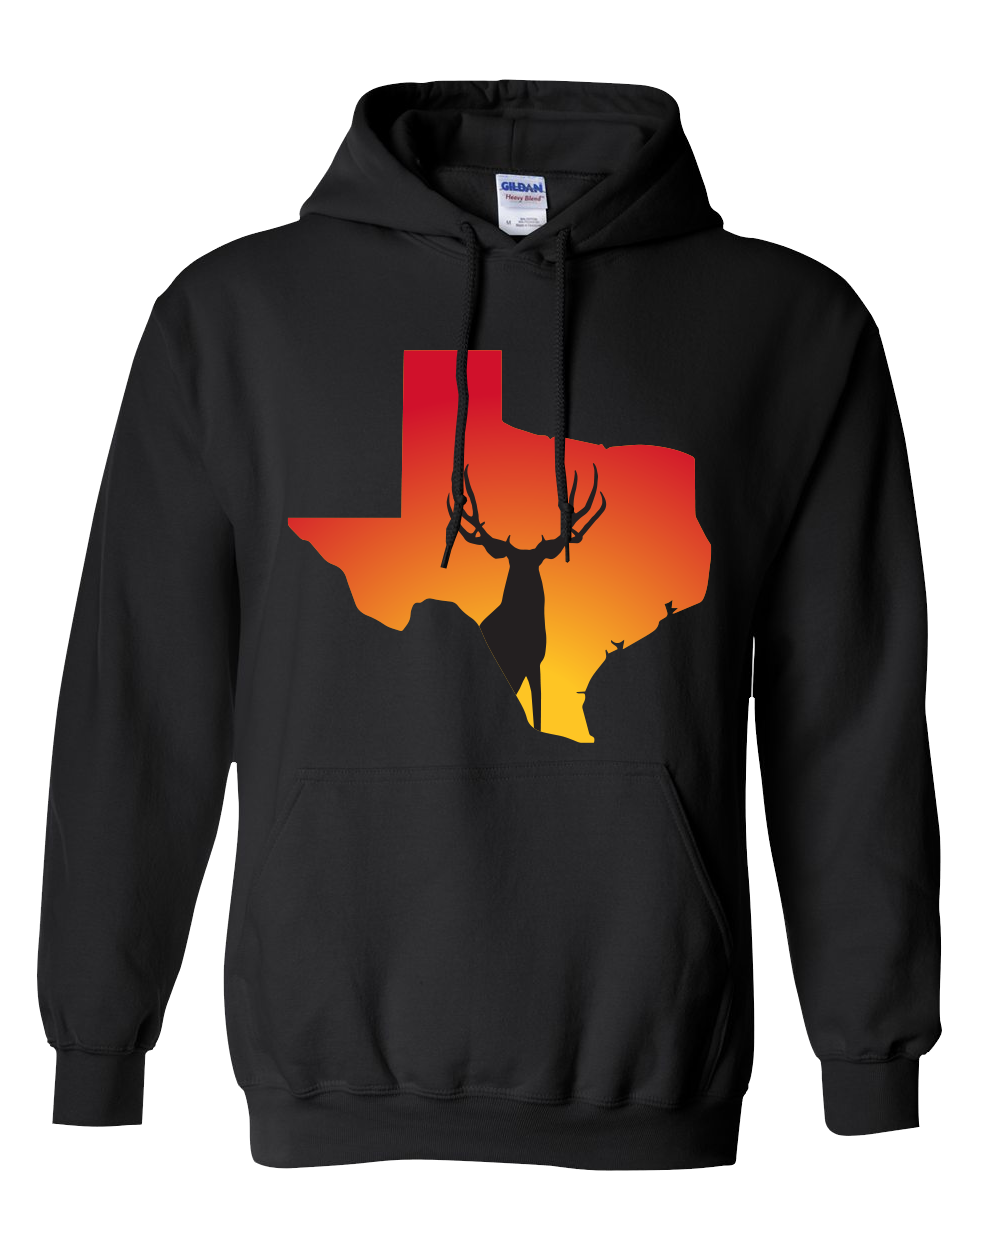 Pullover Hooded Sweatshirt Texas Black Mule Deer Vibrant Design High Quality Tight Knit Ring Spun Low Maintenance Cotton Printed With The Newest Available Color Transfer Technology